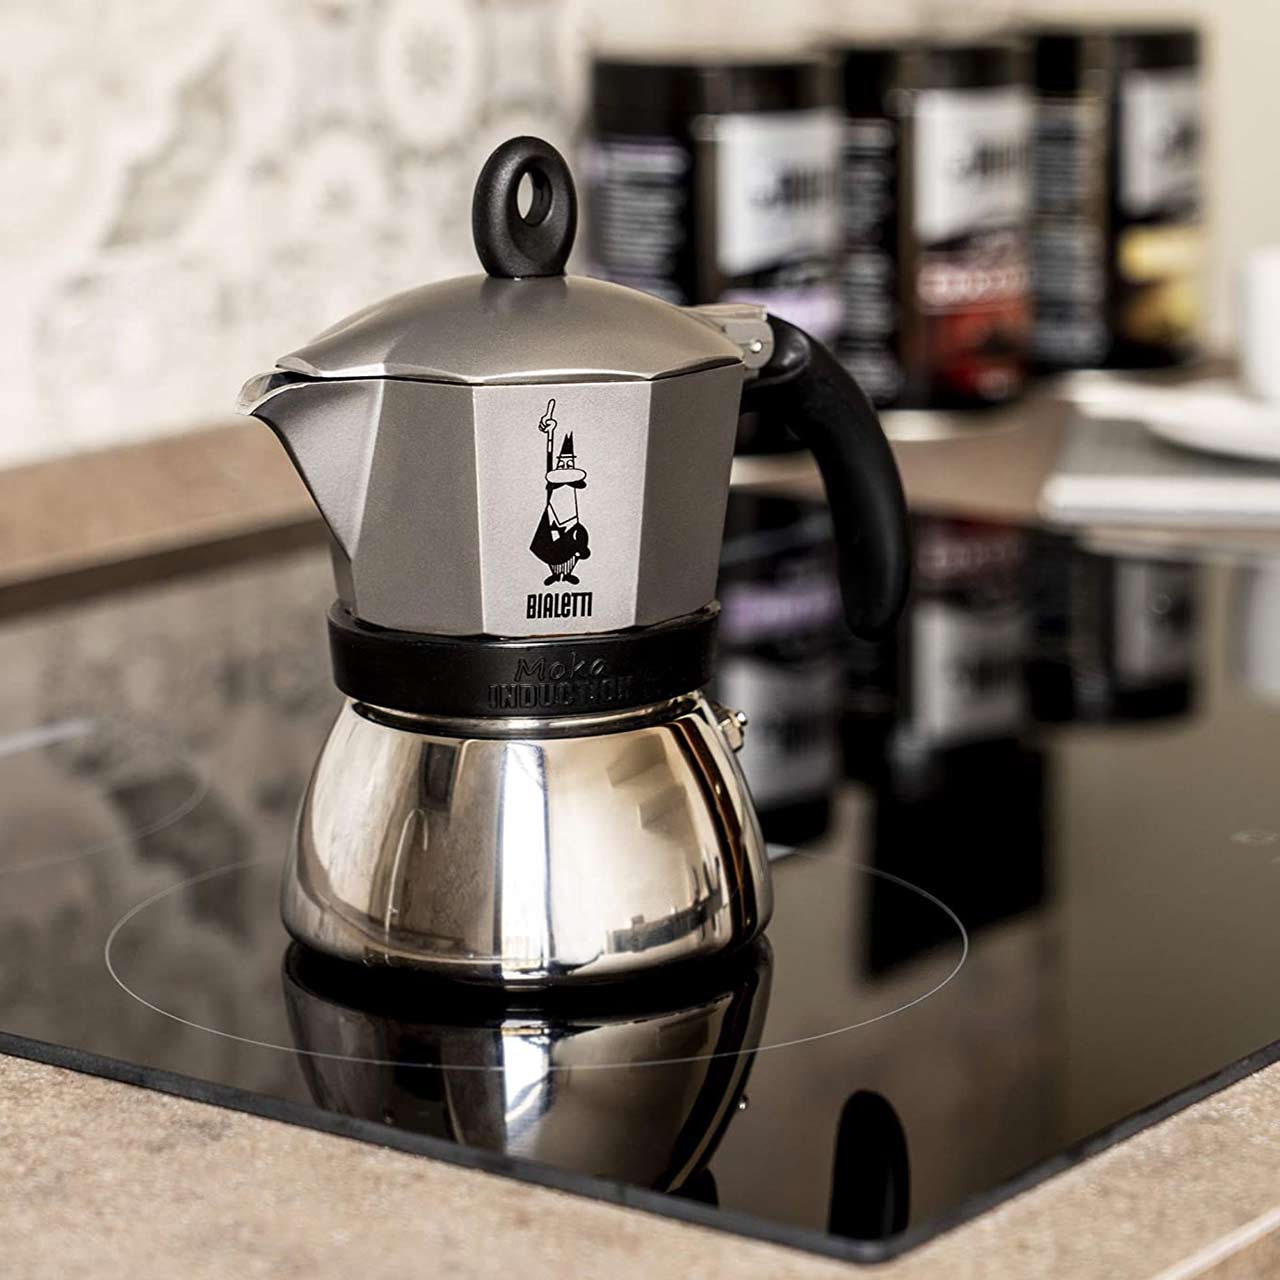 https://cdn11.bigcommerce.com/s-2plzc/images/stencil/original/products/1950/31236/bialetti-moka-induction-3-cup-anthracite-2a-01-op__06753.1587692320.jpg?c=2